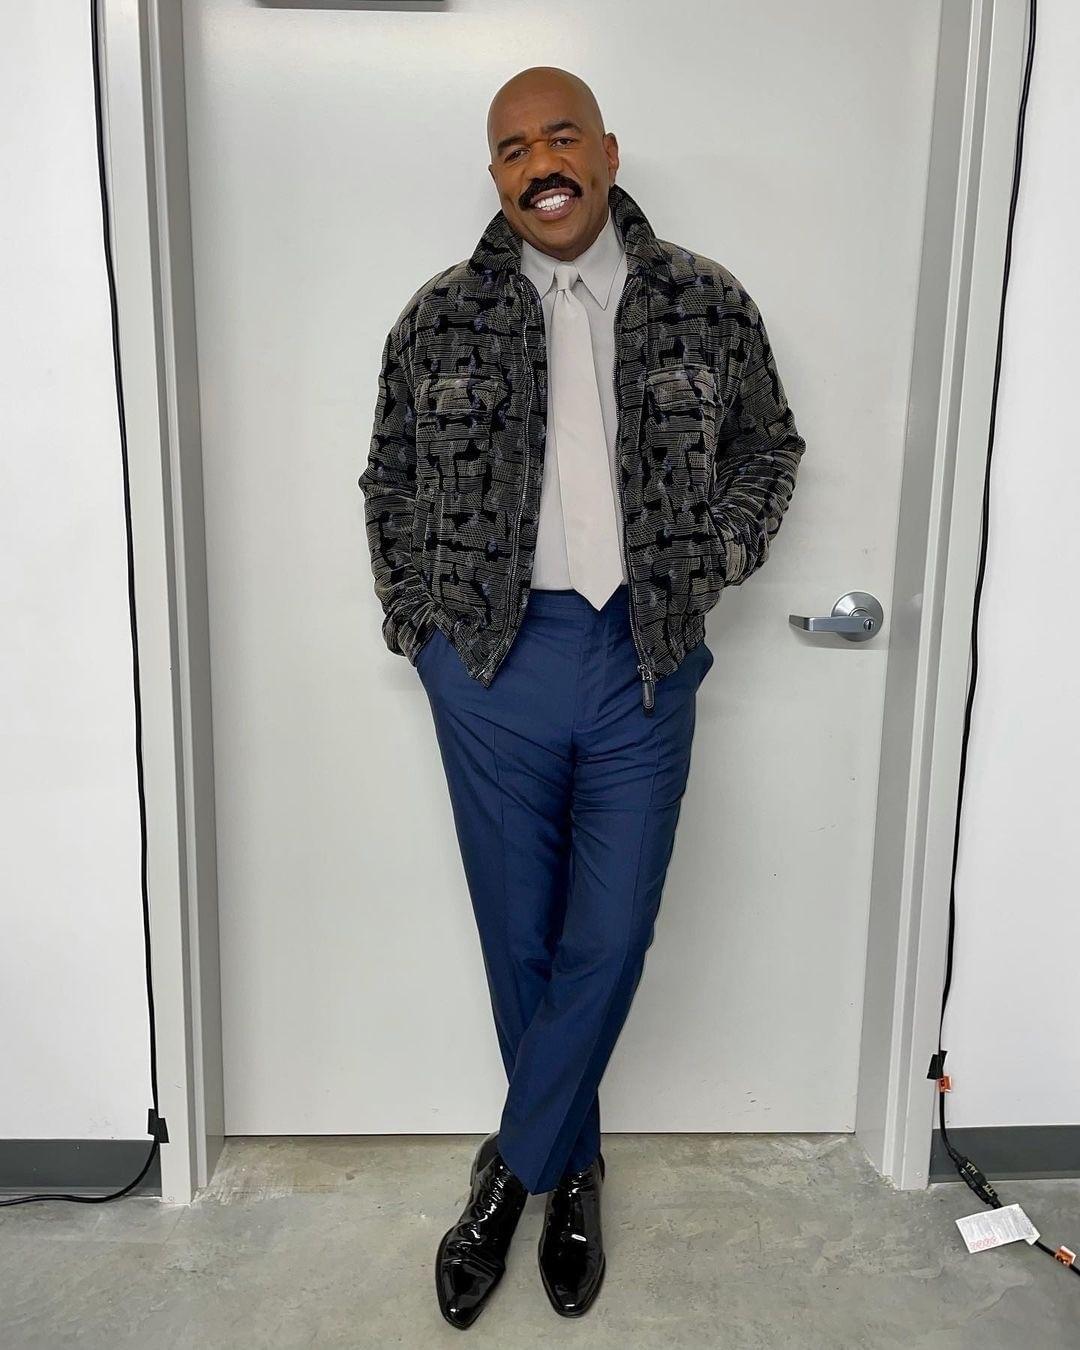 An amazing photo showing Steve Harvey in a gray jacket over a white shirt and blue pant.